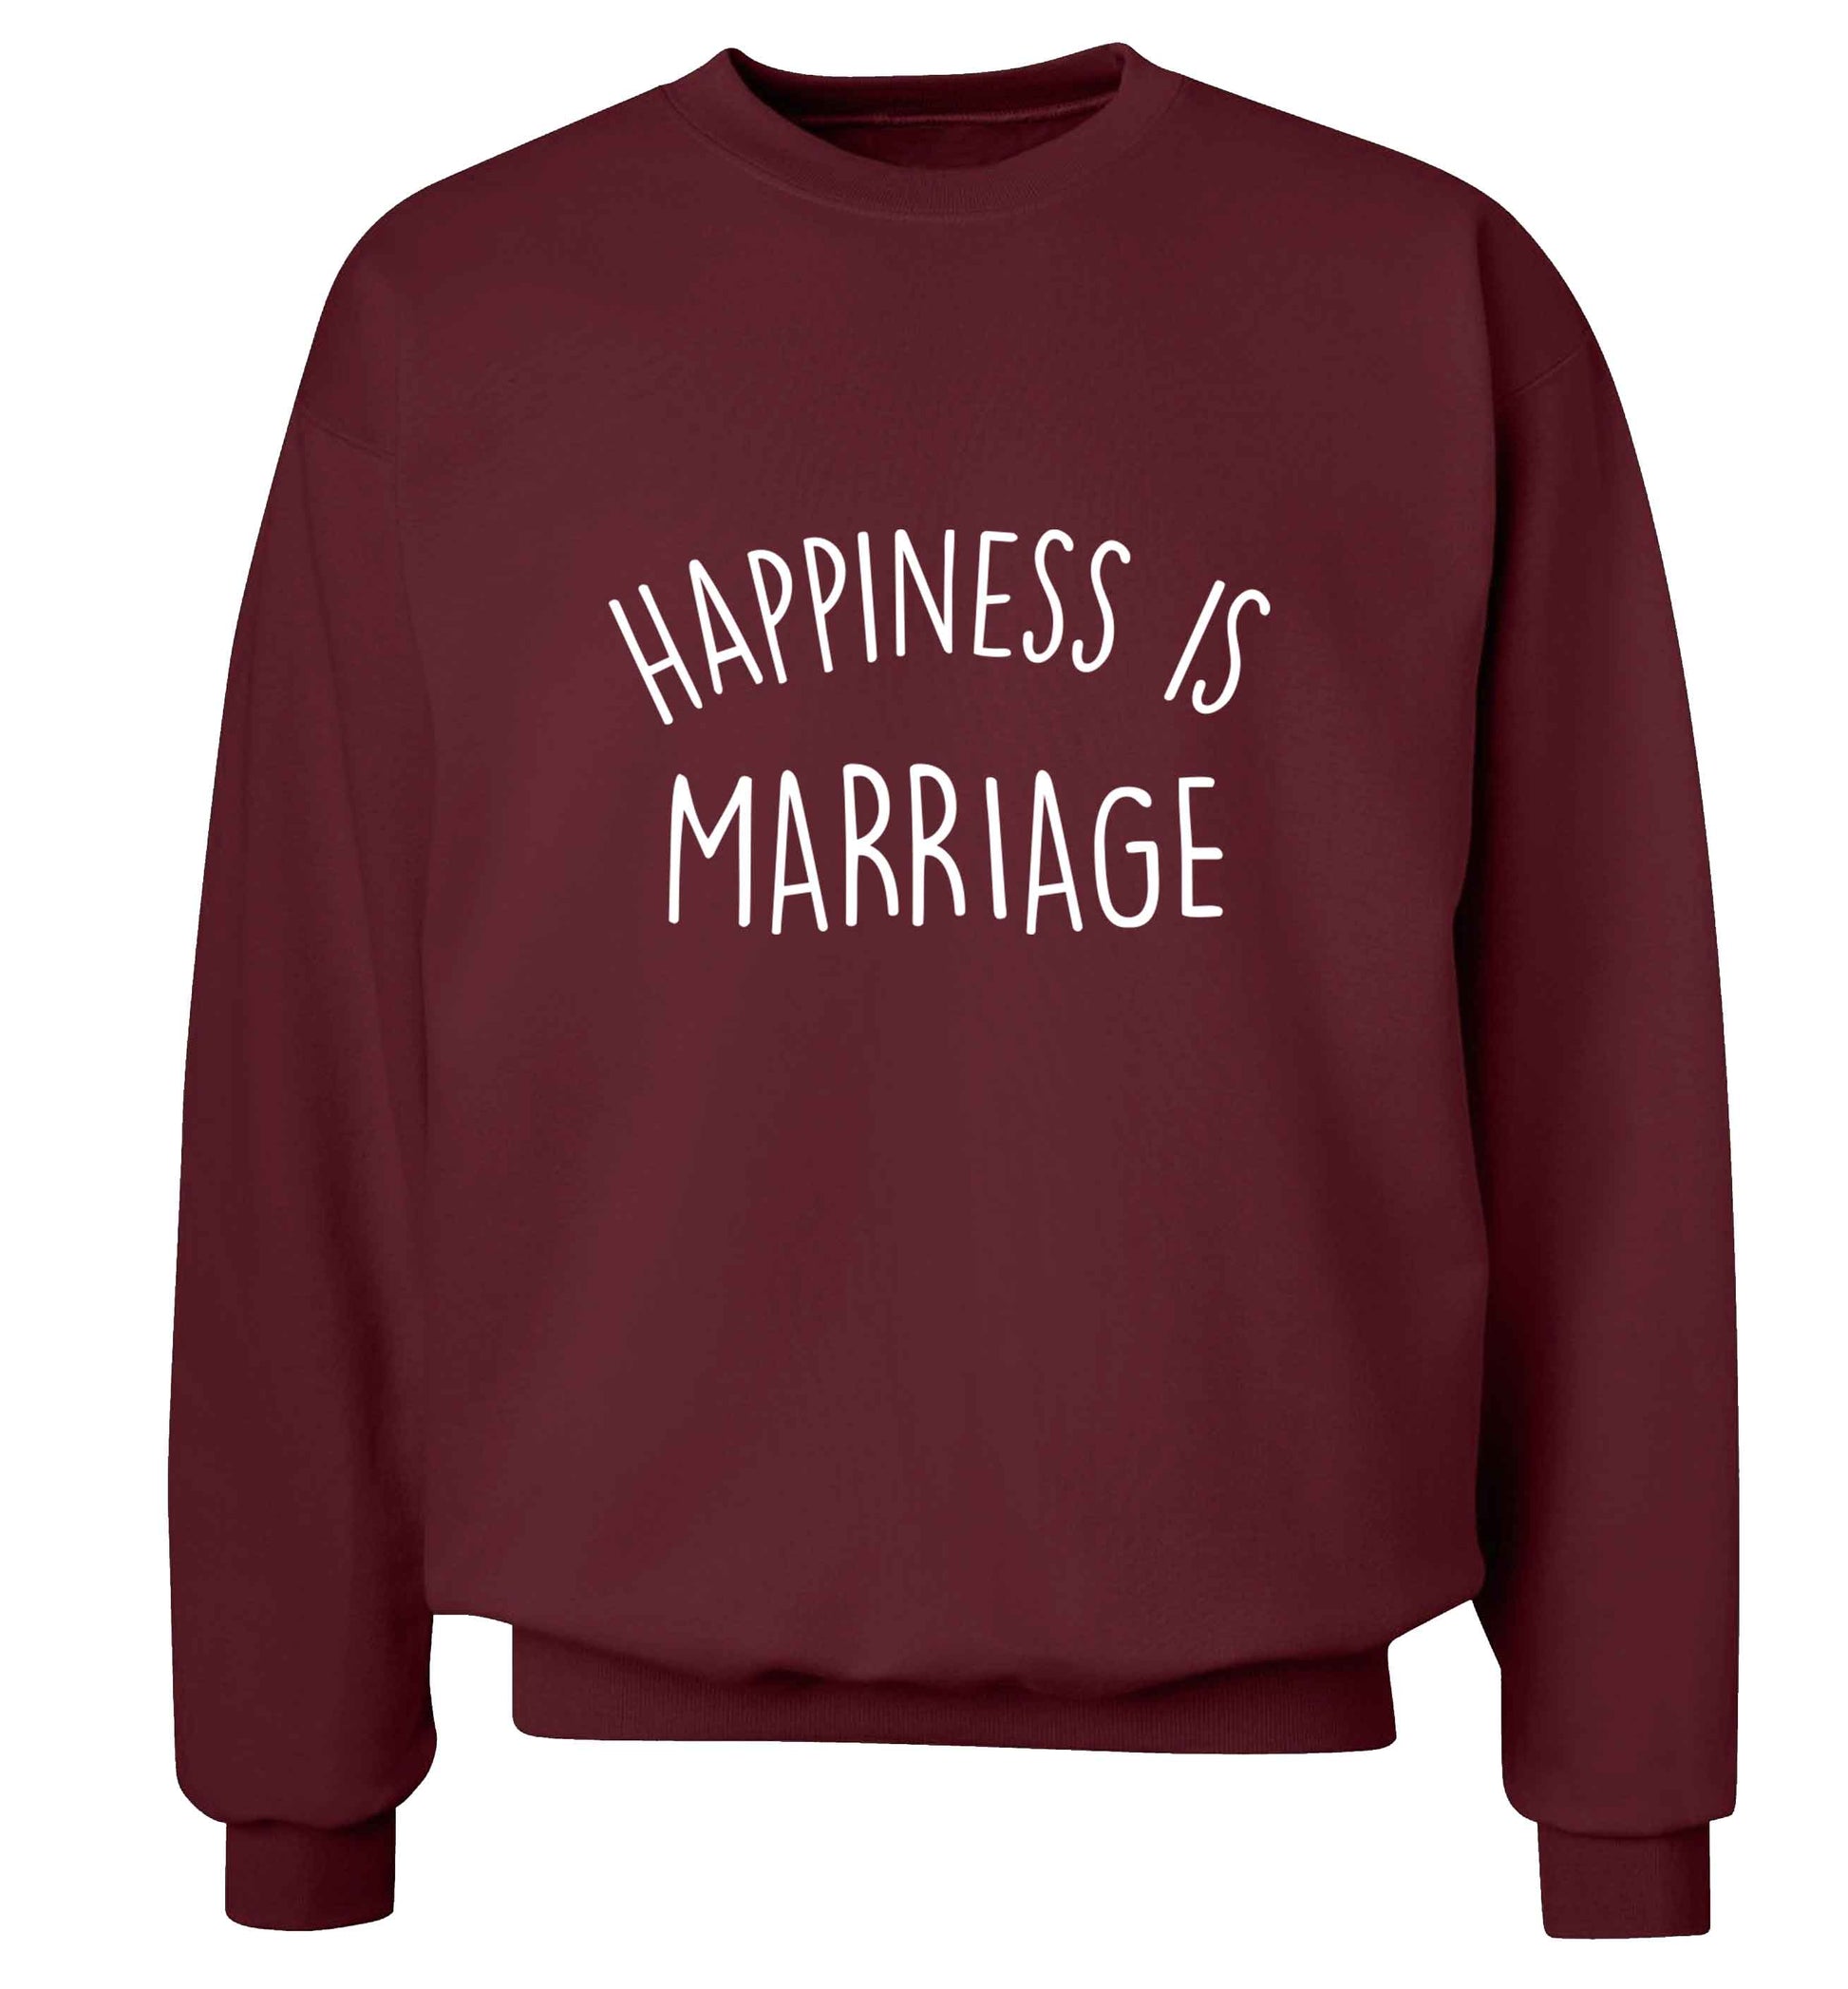 Happiness is marriage adult's unisex maroon sweater 2XL